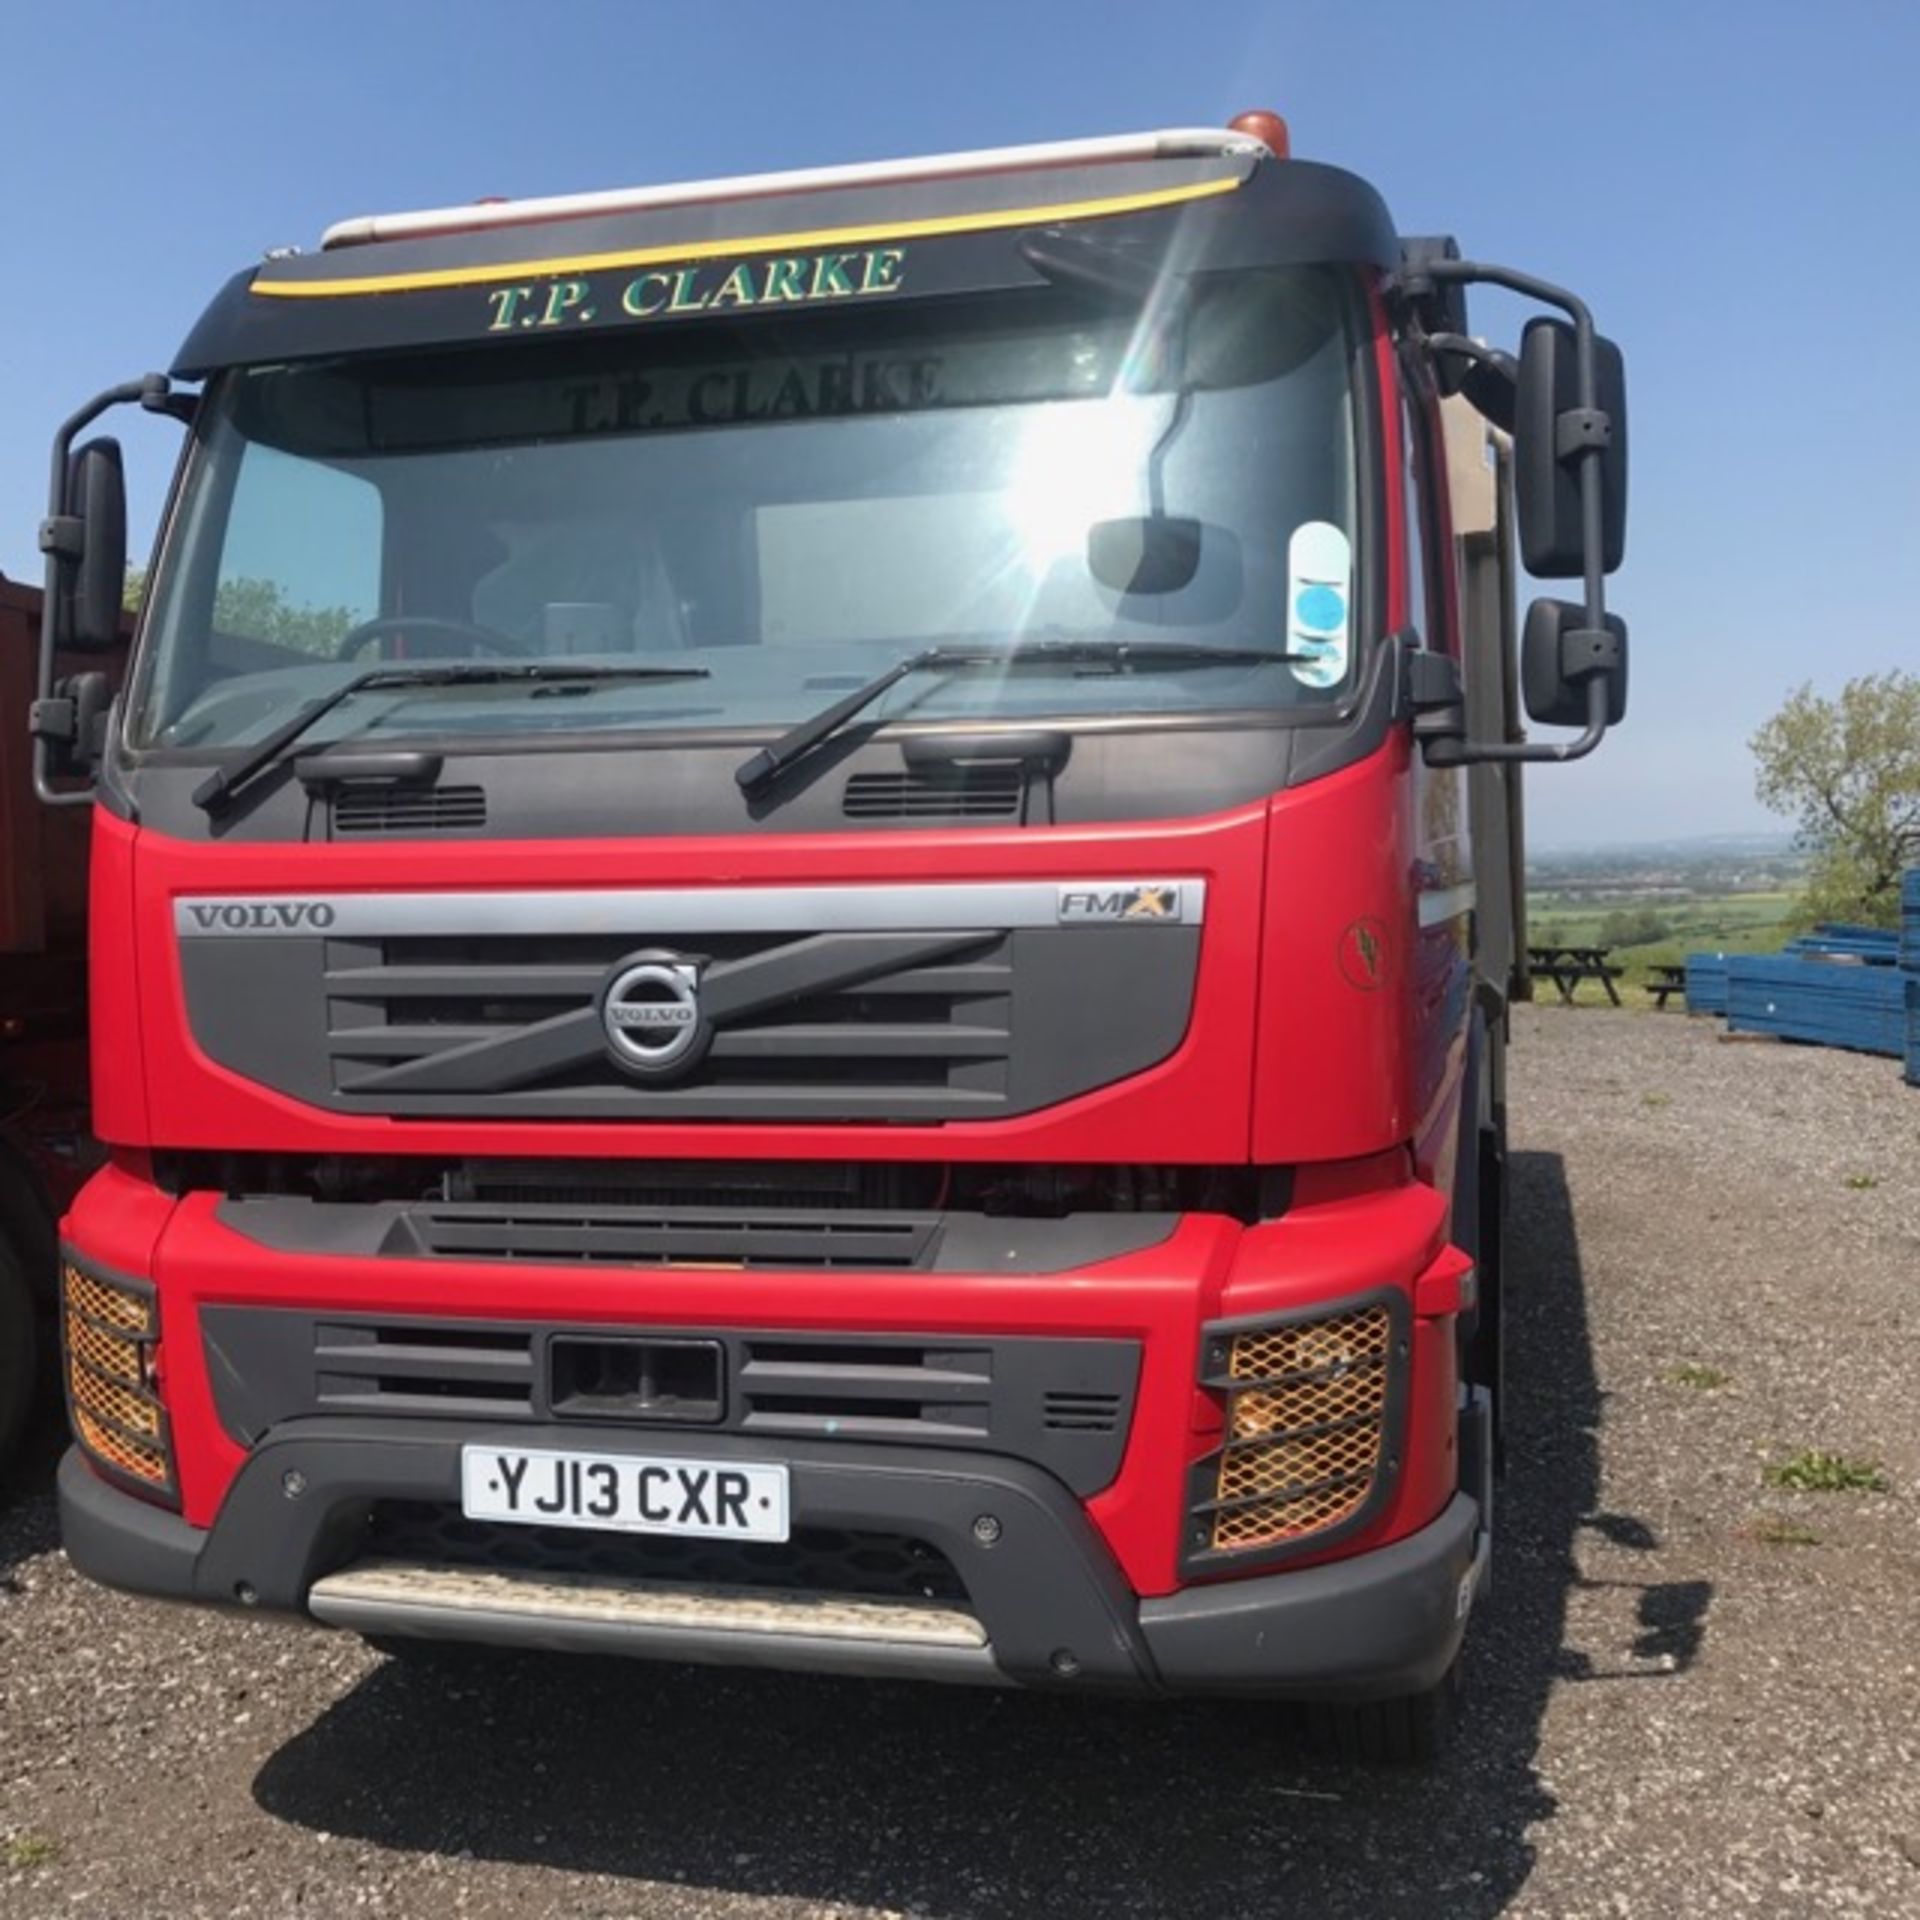 2013 Volvo FMX 8 x 4 Tipper lorry, registration YJ13CXR, automatic transmission , fitted with